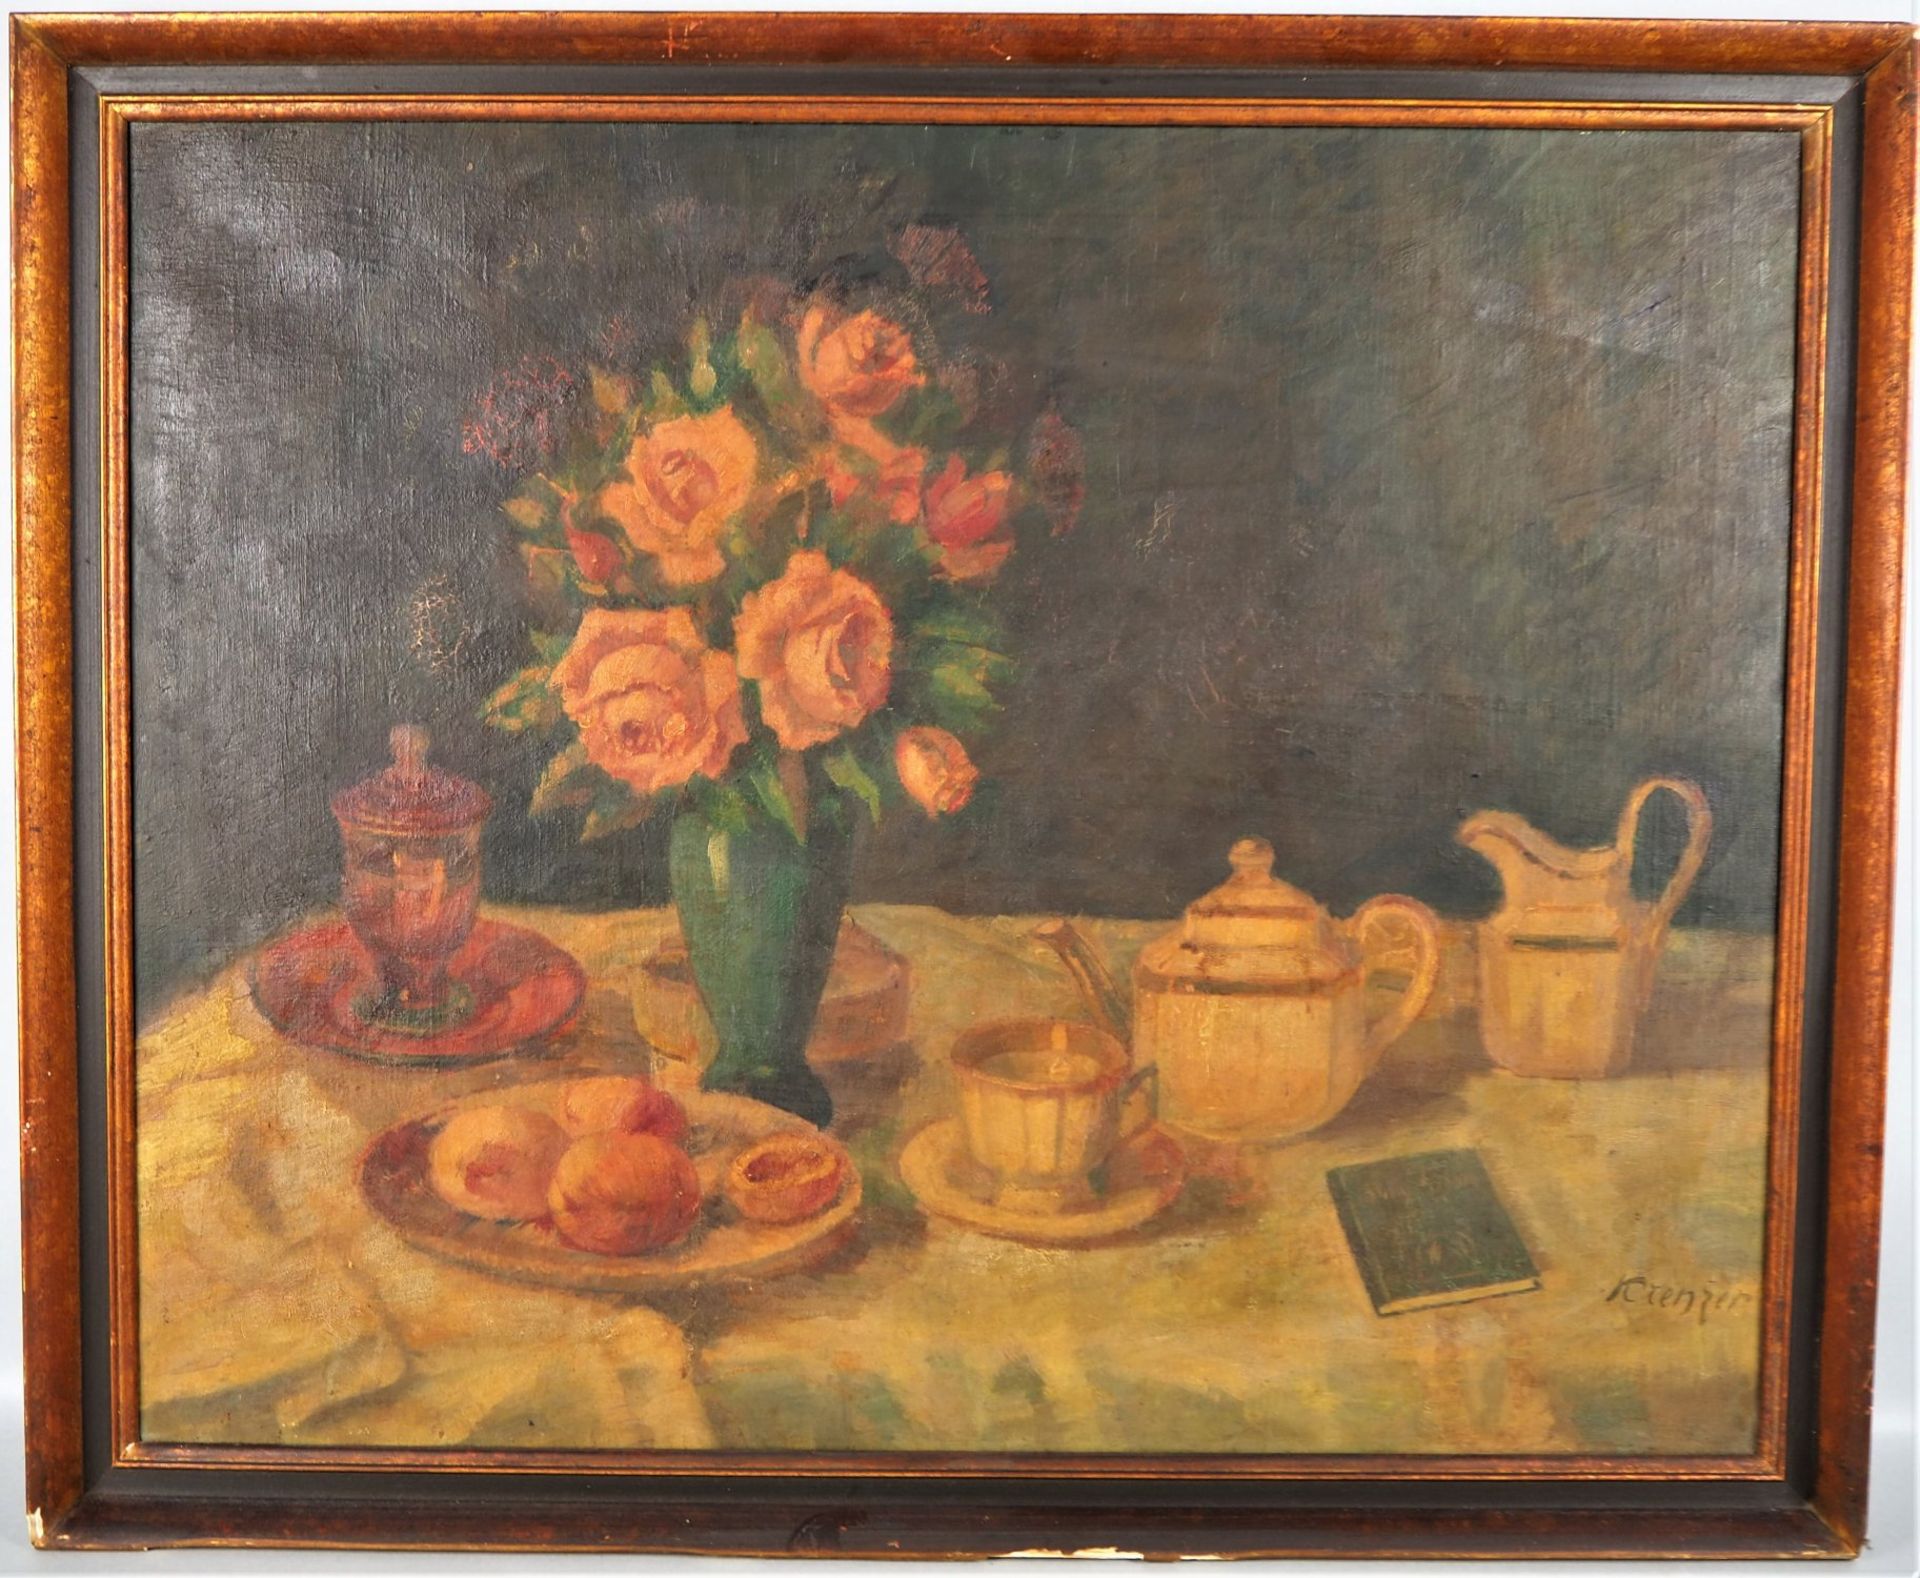 Krenzer, Still life, probably early 20th century. 